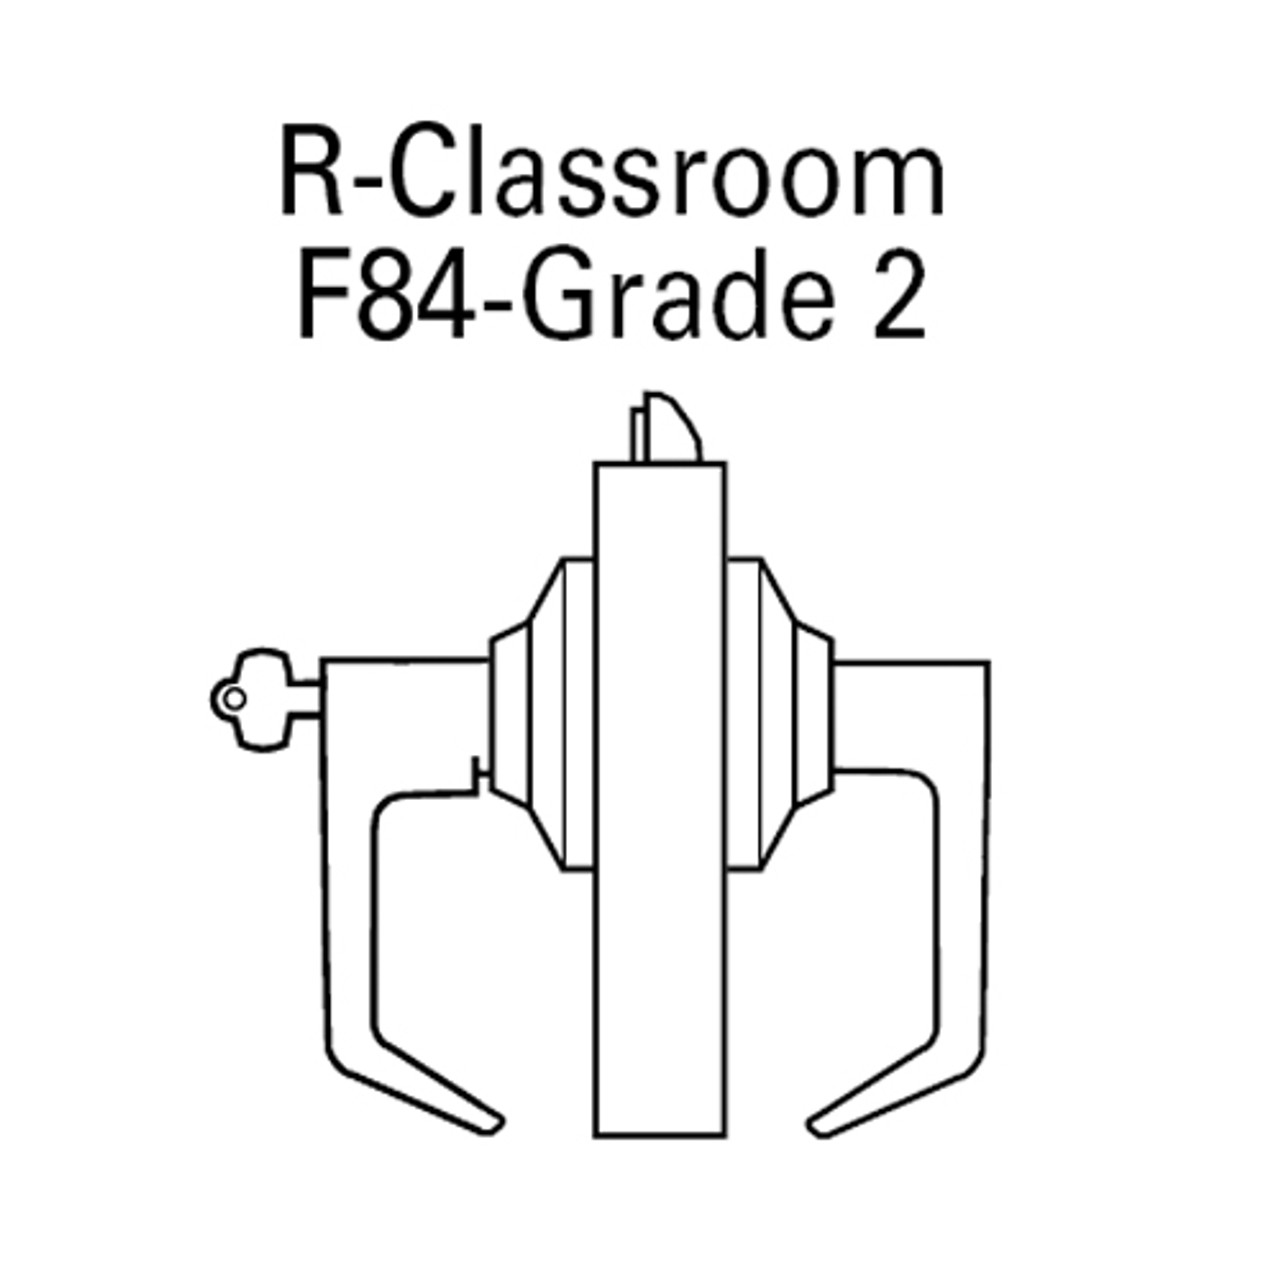 7KC27R16DSTK626 Best 7KC Series Classroom Medium Duty Cylindrical Lever Locks with Curved Without Return Lever Design in Satin Chrome